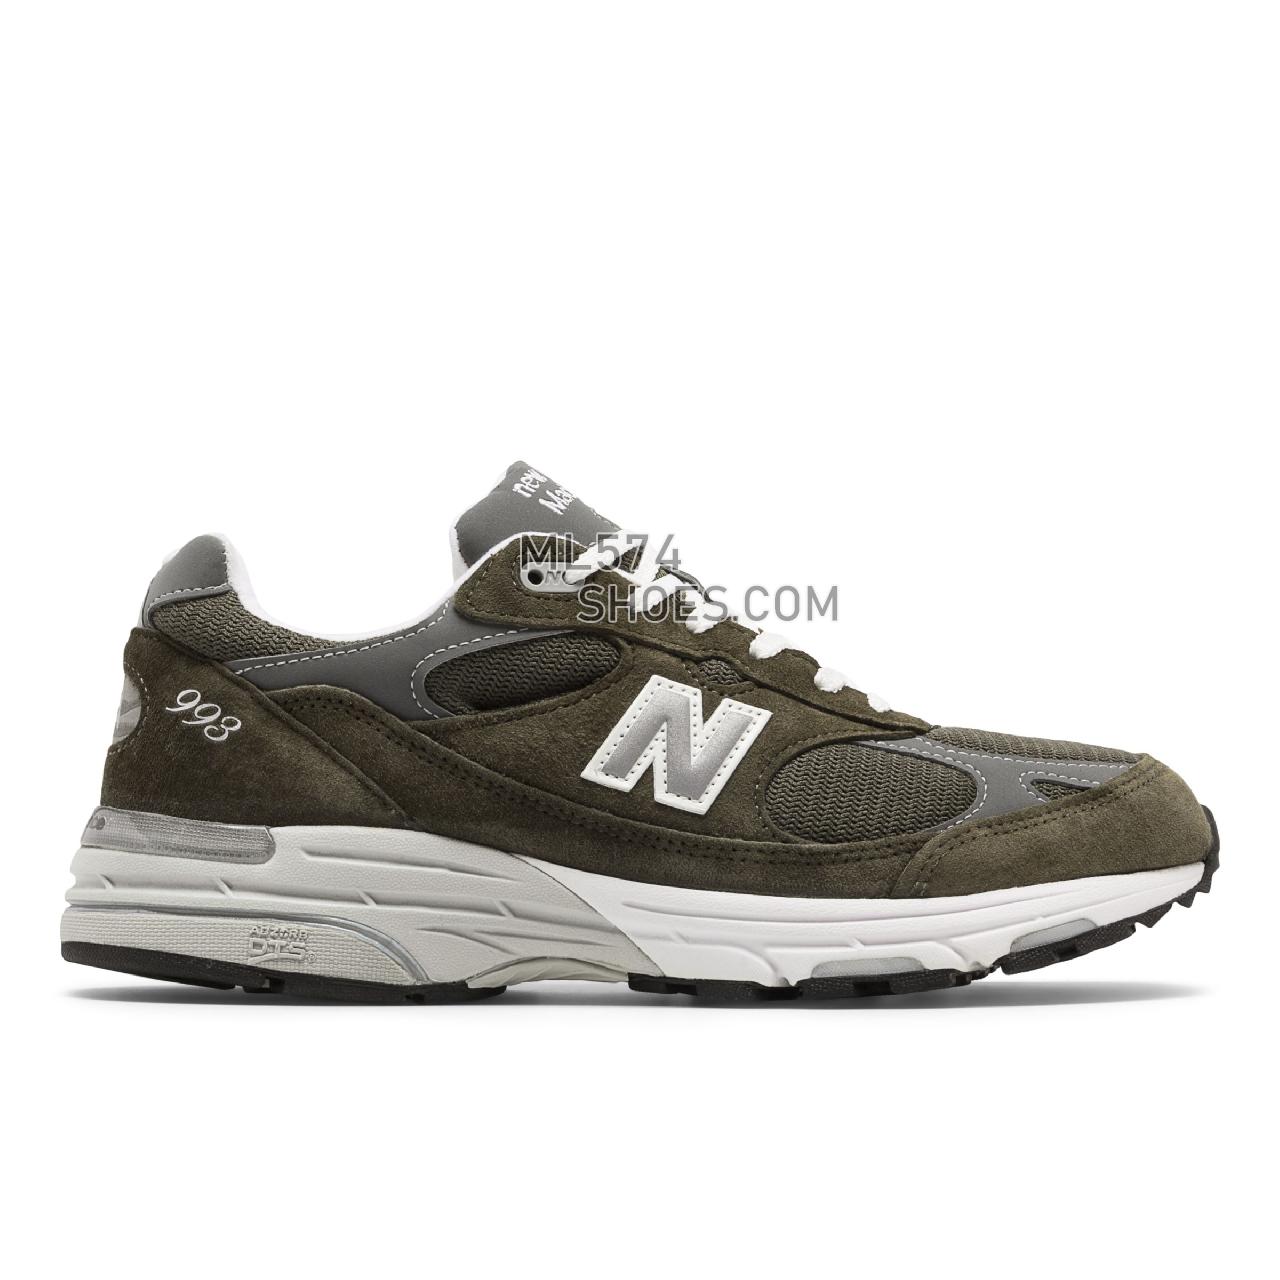 New Balance Made in USA 993 - Men's Classic Sneakers - Military Foliage Green with Grey - MR993MG